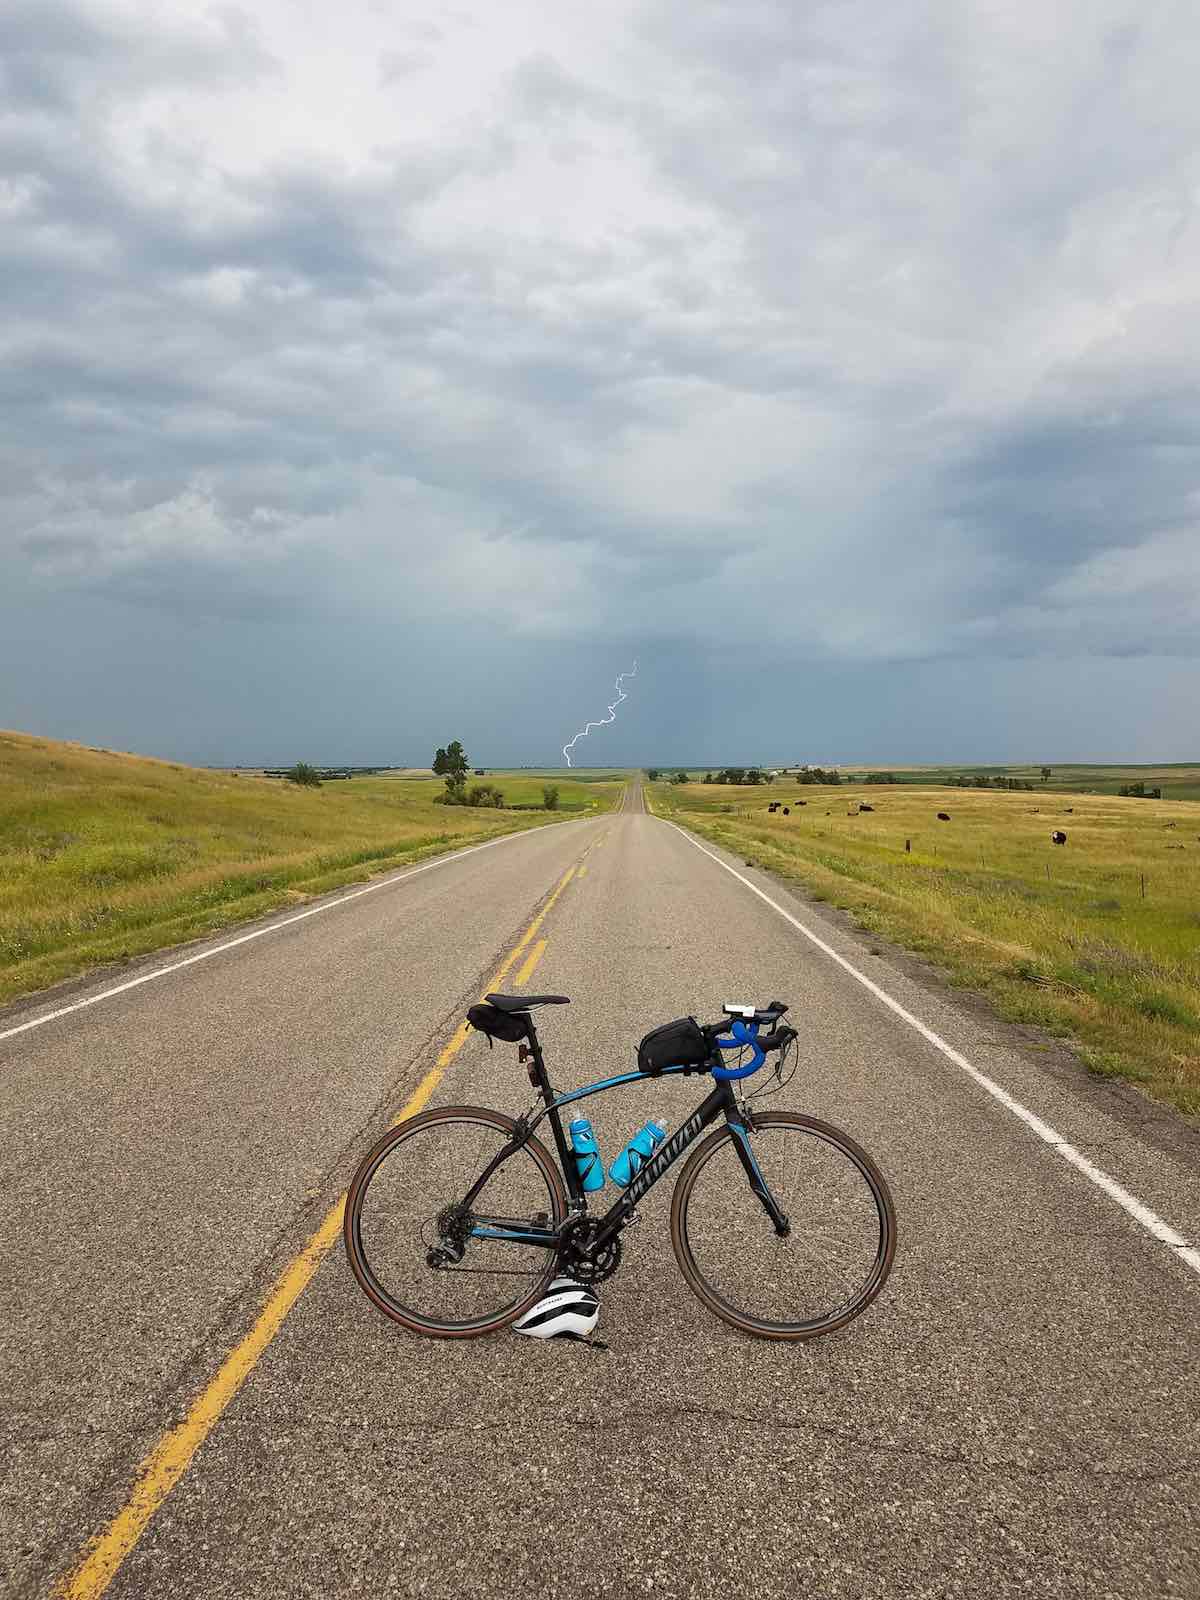 bikerumor pic of the day a specialized road bike is posed in the middle of a long straight road with flatlands on either side and a dark storm with one lone lightning strike in the distance.